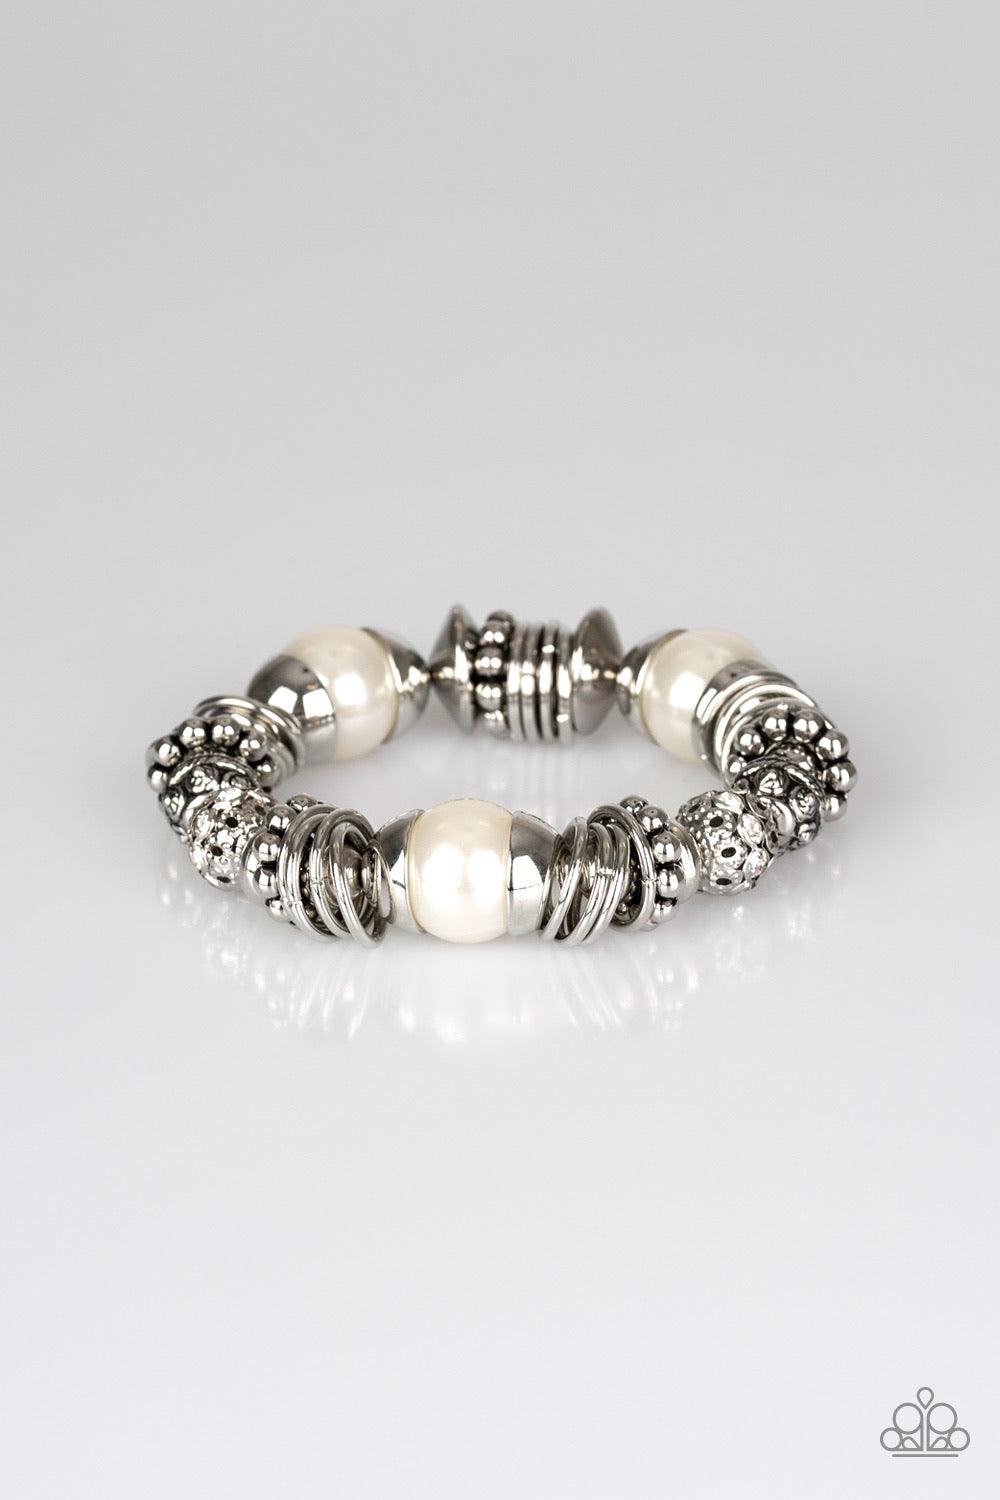 Paparazzi Accessories Uptown Tease - White A collection of oversized white pearls, mismatched silver accents, and white rhinestone encrusted beads are threaded along a stretchy band around the wrist for a show-stopping look. Jewelry